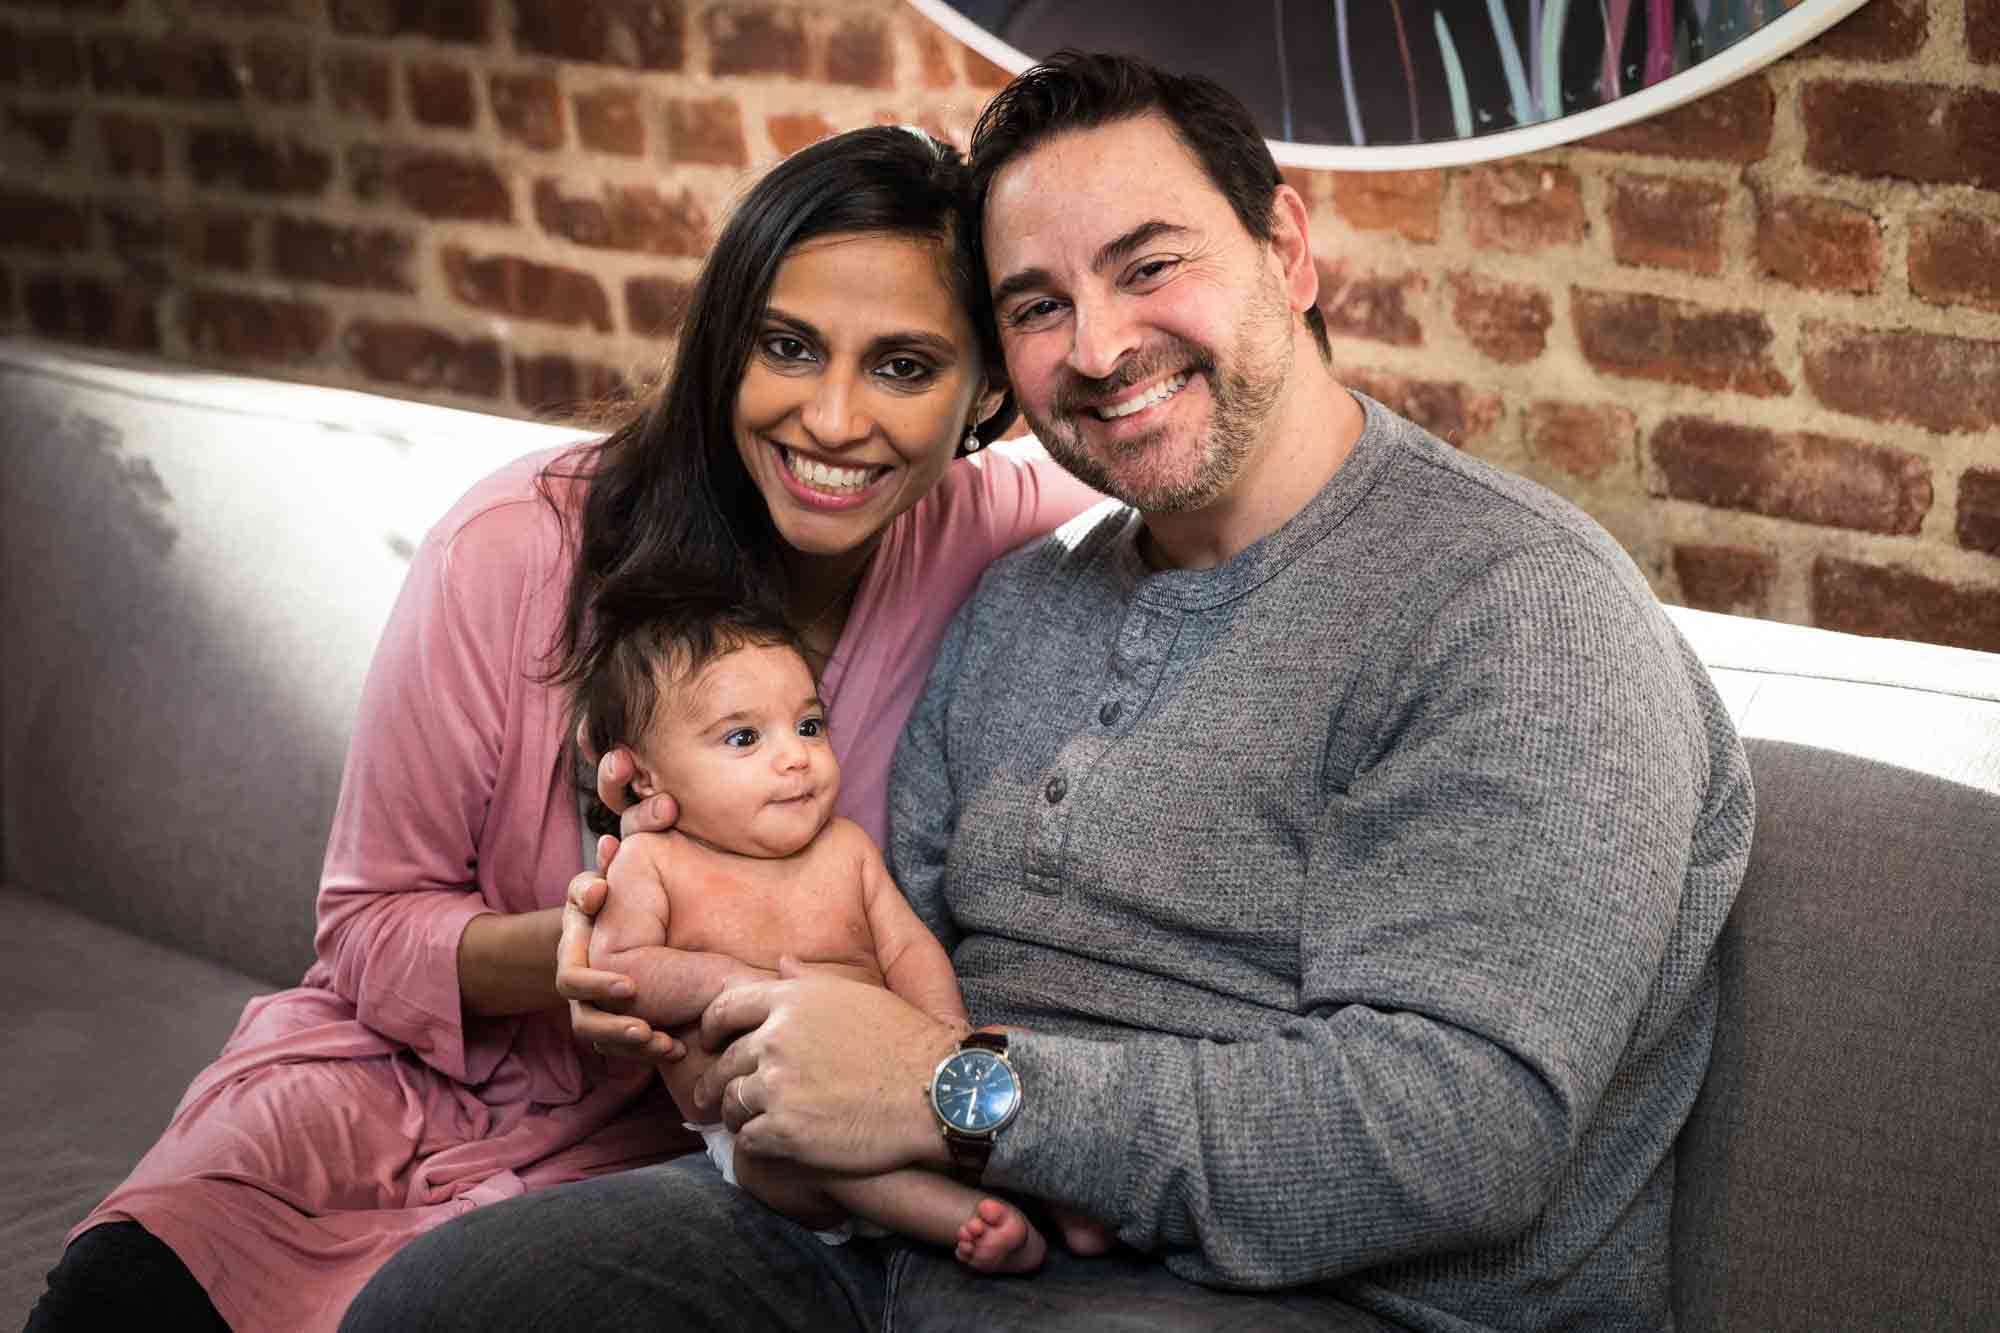 Parents smiling with newborn baby in front of brick wall